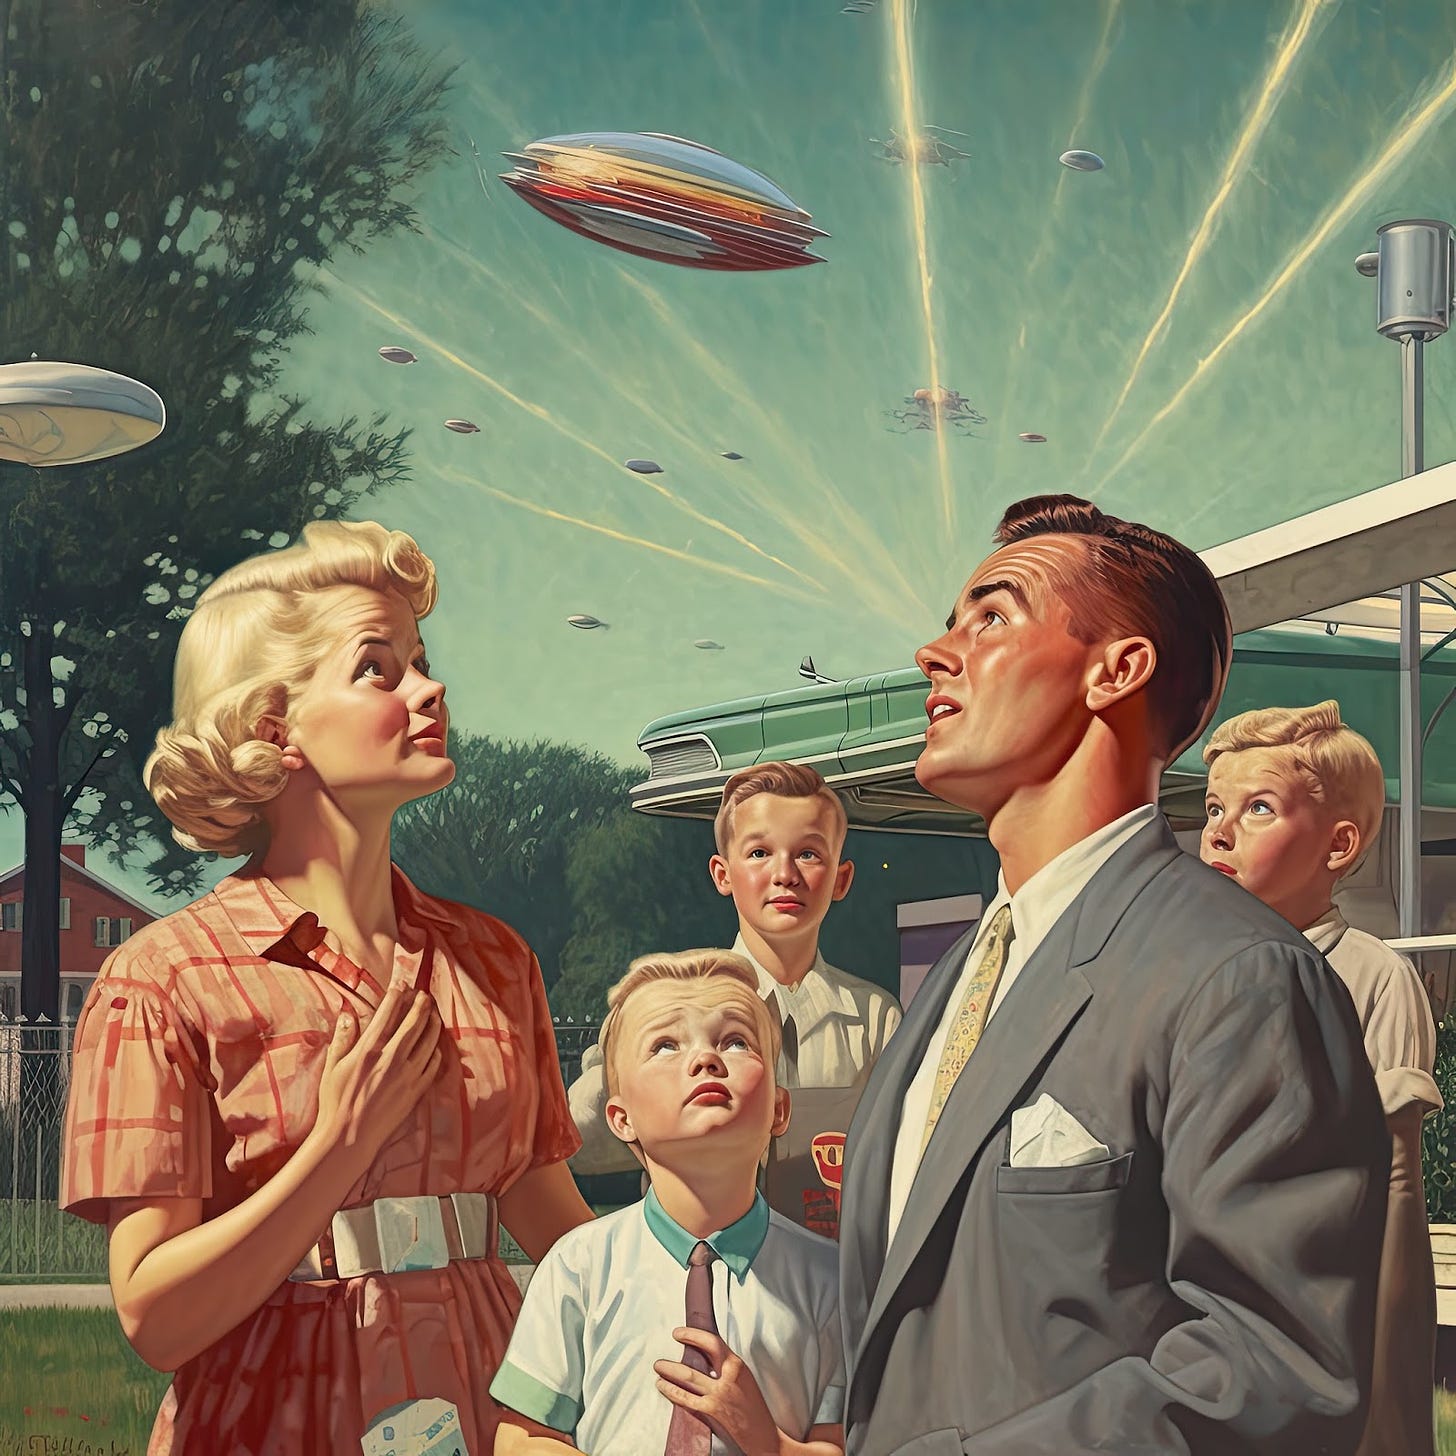 AI-generated image: 'The Day The Earth Stood Still' - a family watches as 1950s-style UFOs land in their garden.